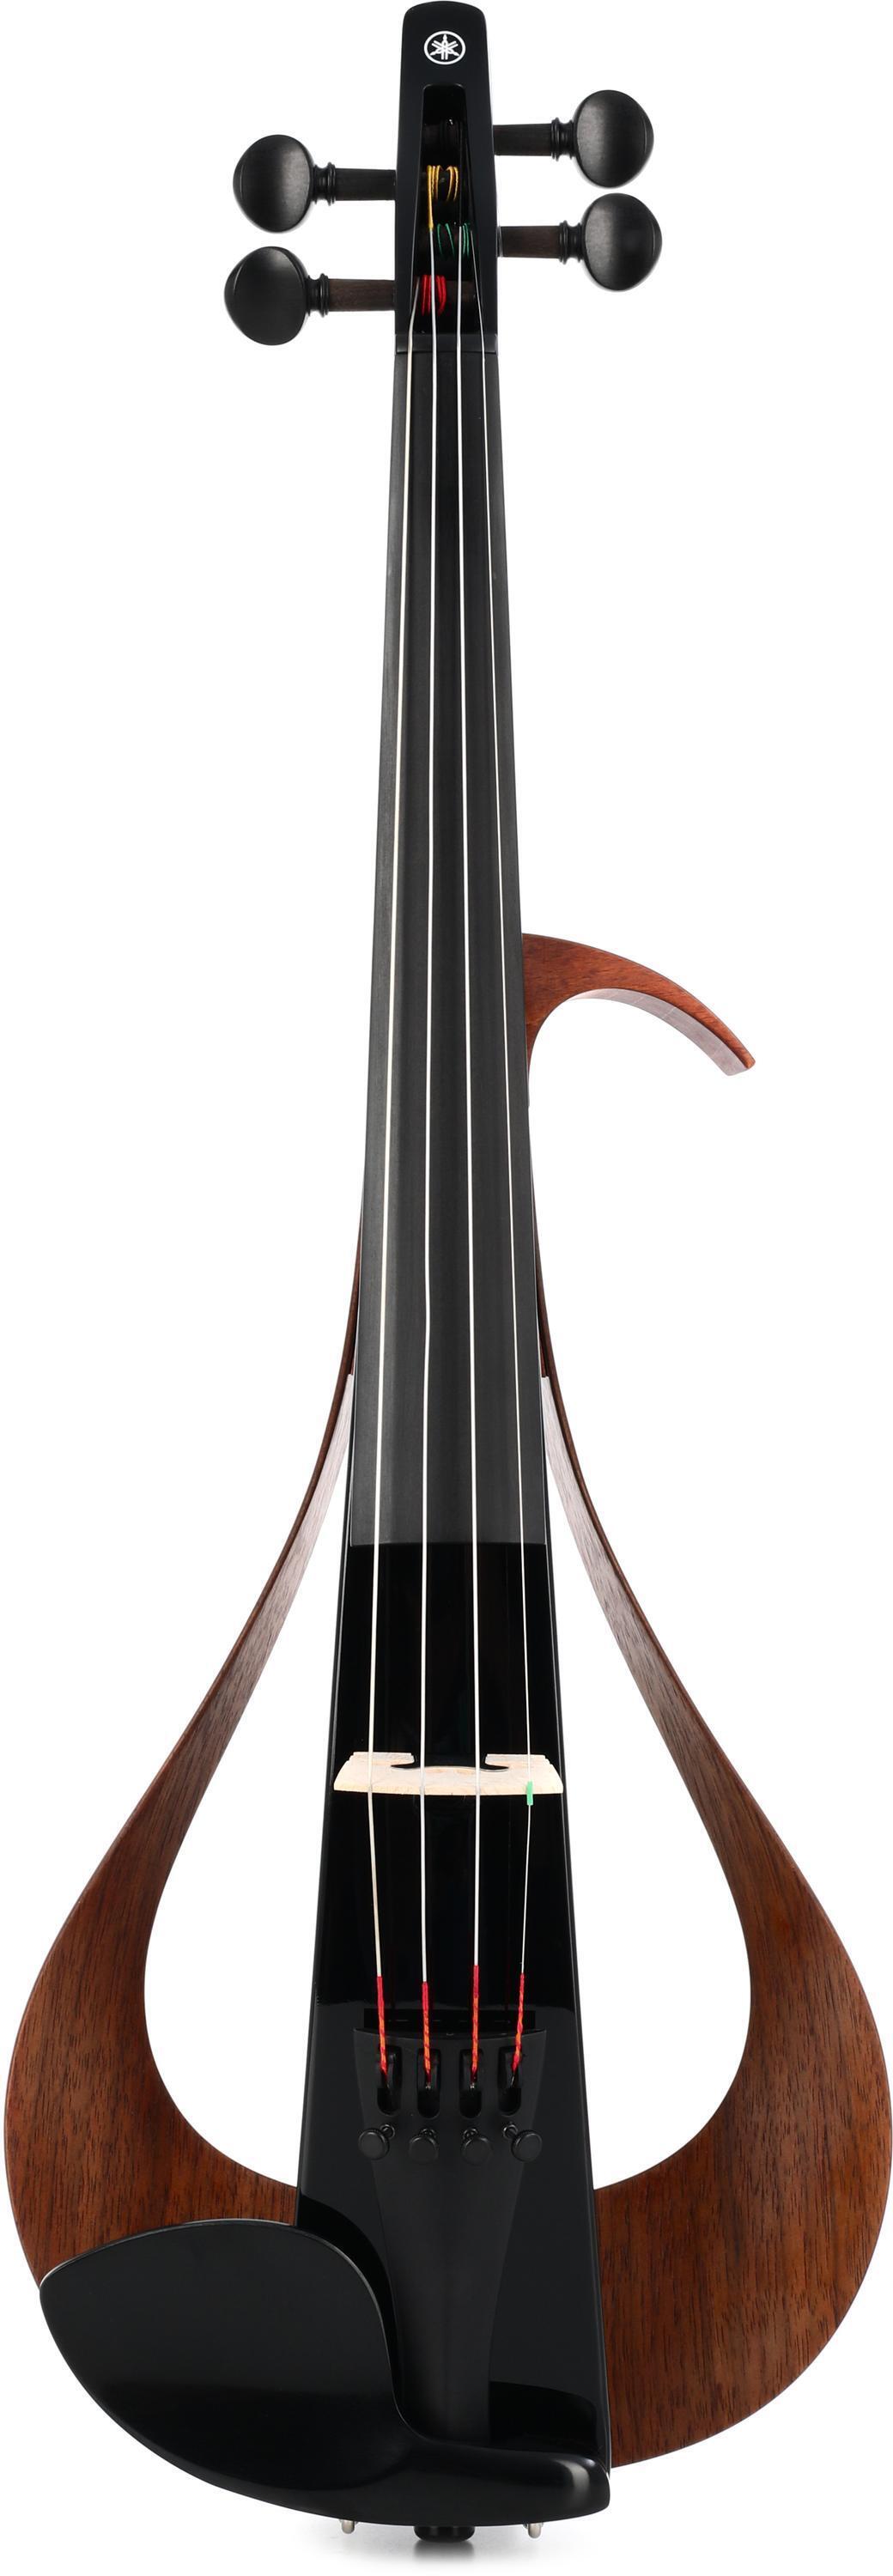 YEV104 Electric Violin - Black Lacquer - Sweetwater